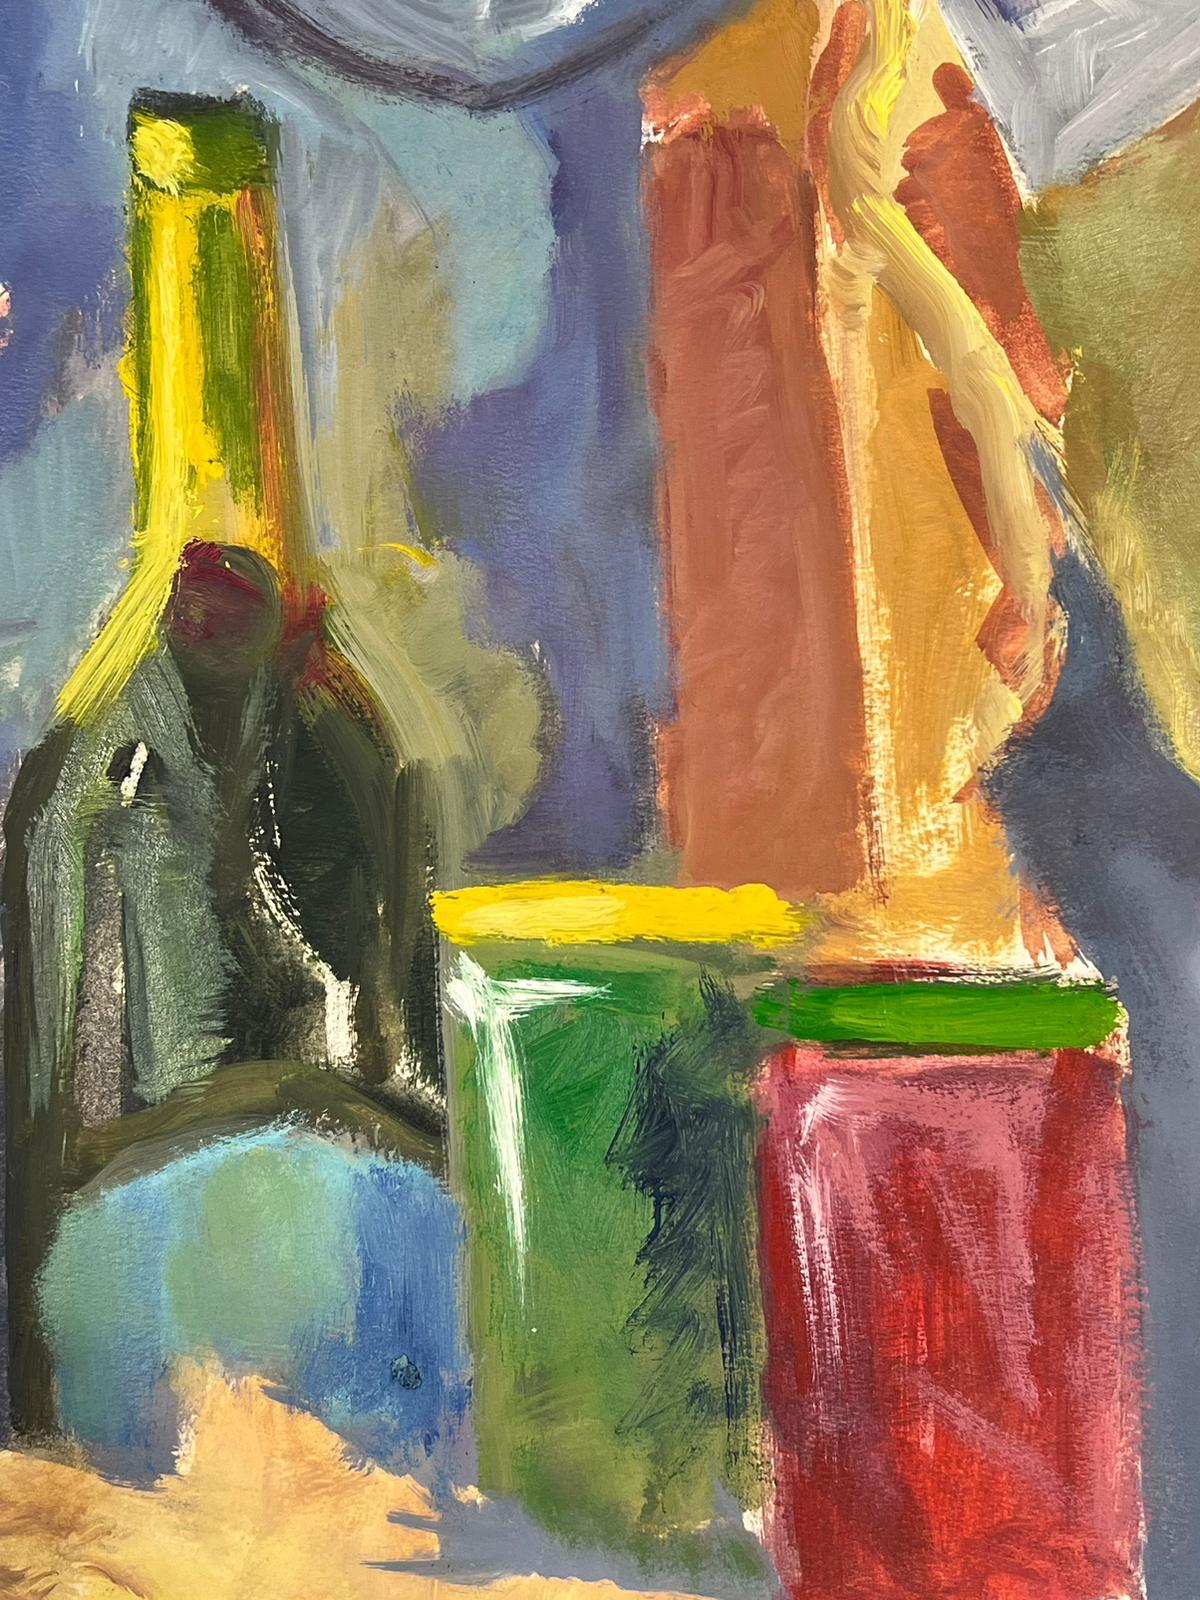 Champagne
by Guy Nicod
(French 1923 - 2021)
oil on artist paper, unframed
painting : 26 x 19.5 inches
provenance: artists estate, France
condition: very good and sound condition